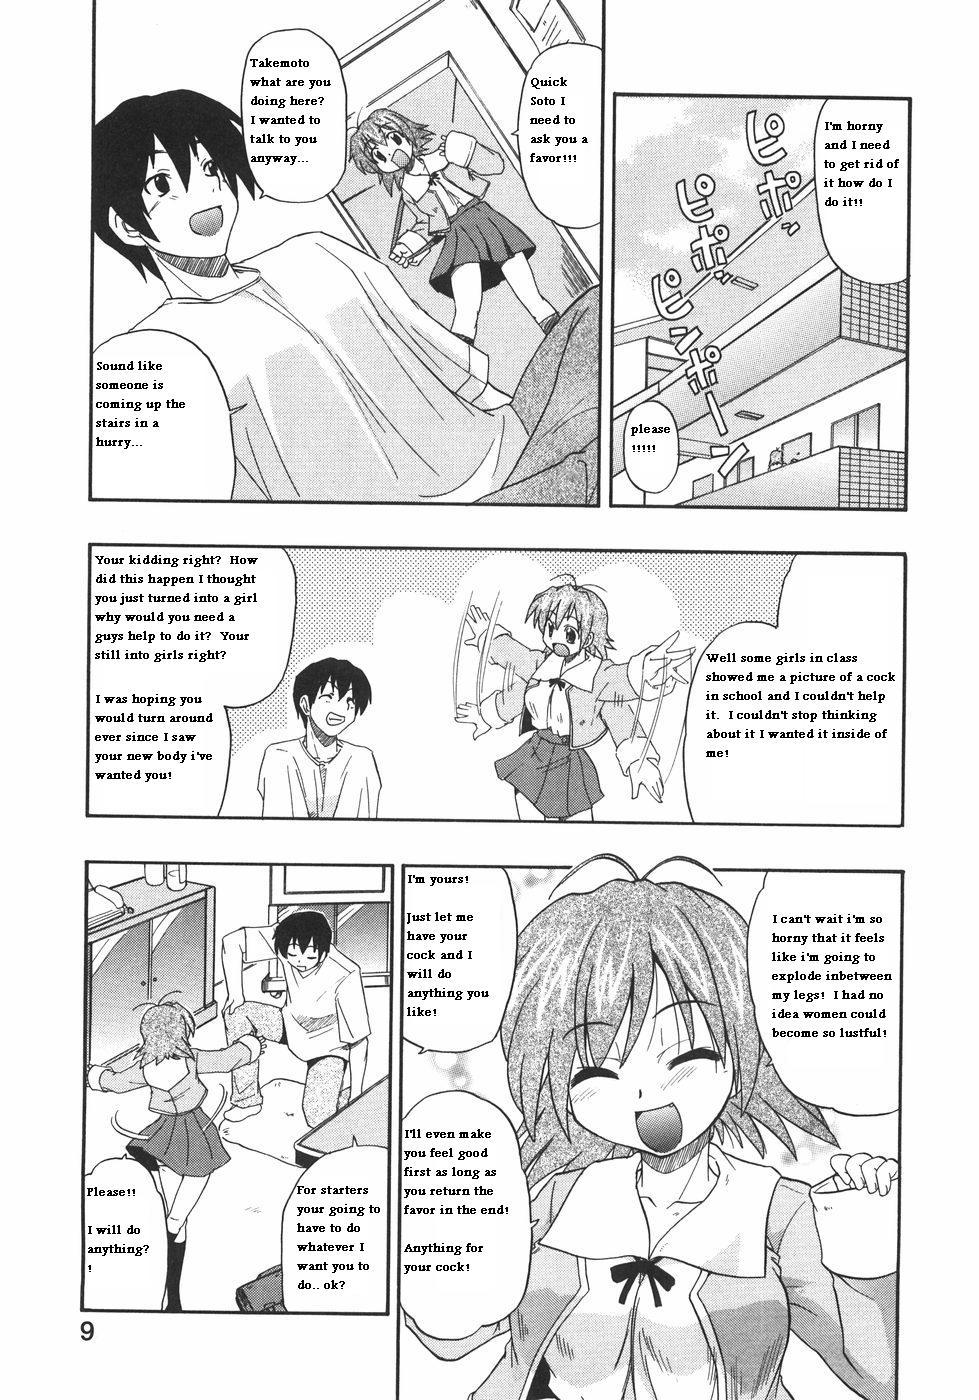 Gay Kissing The New Girl Teenager - Page 5